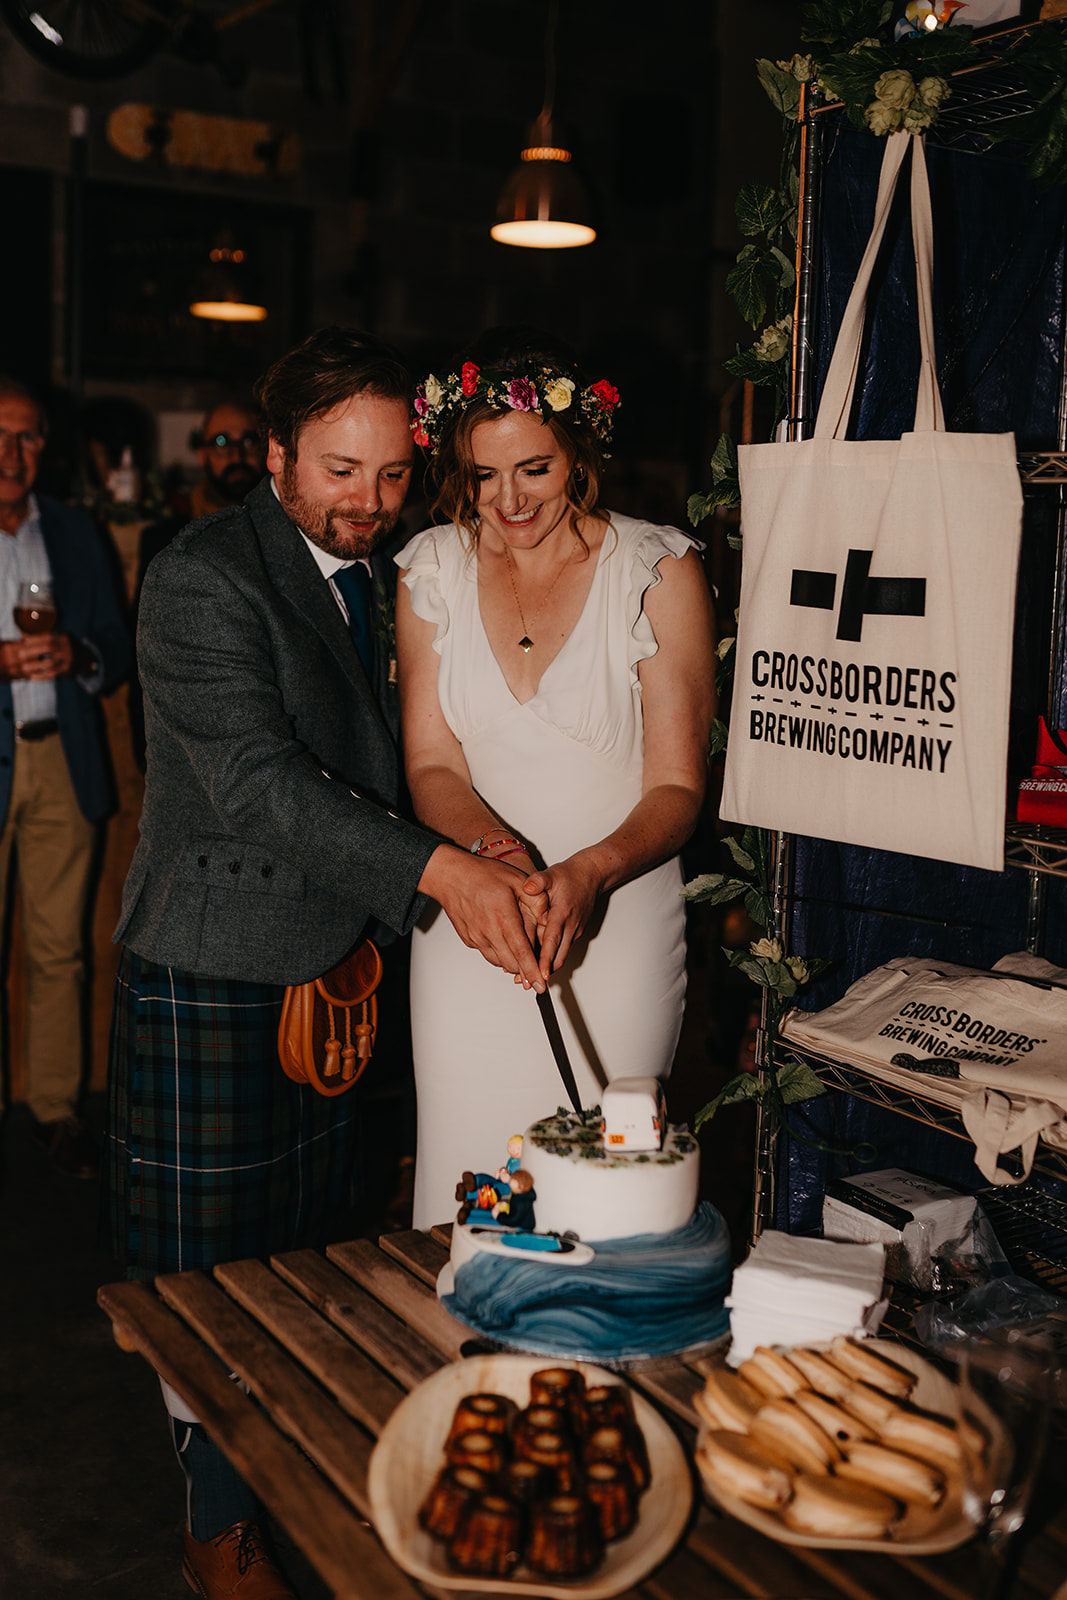 Couple cut the cake at Crossborders brewery taproom